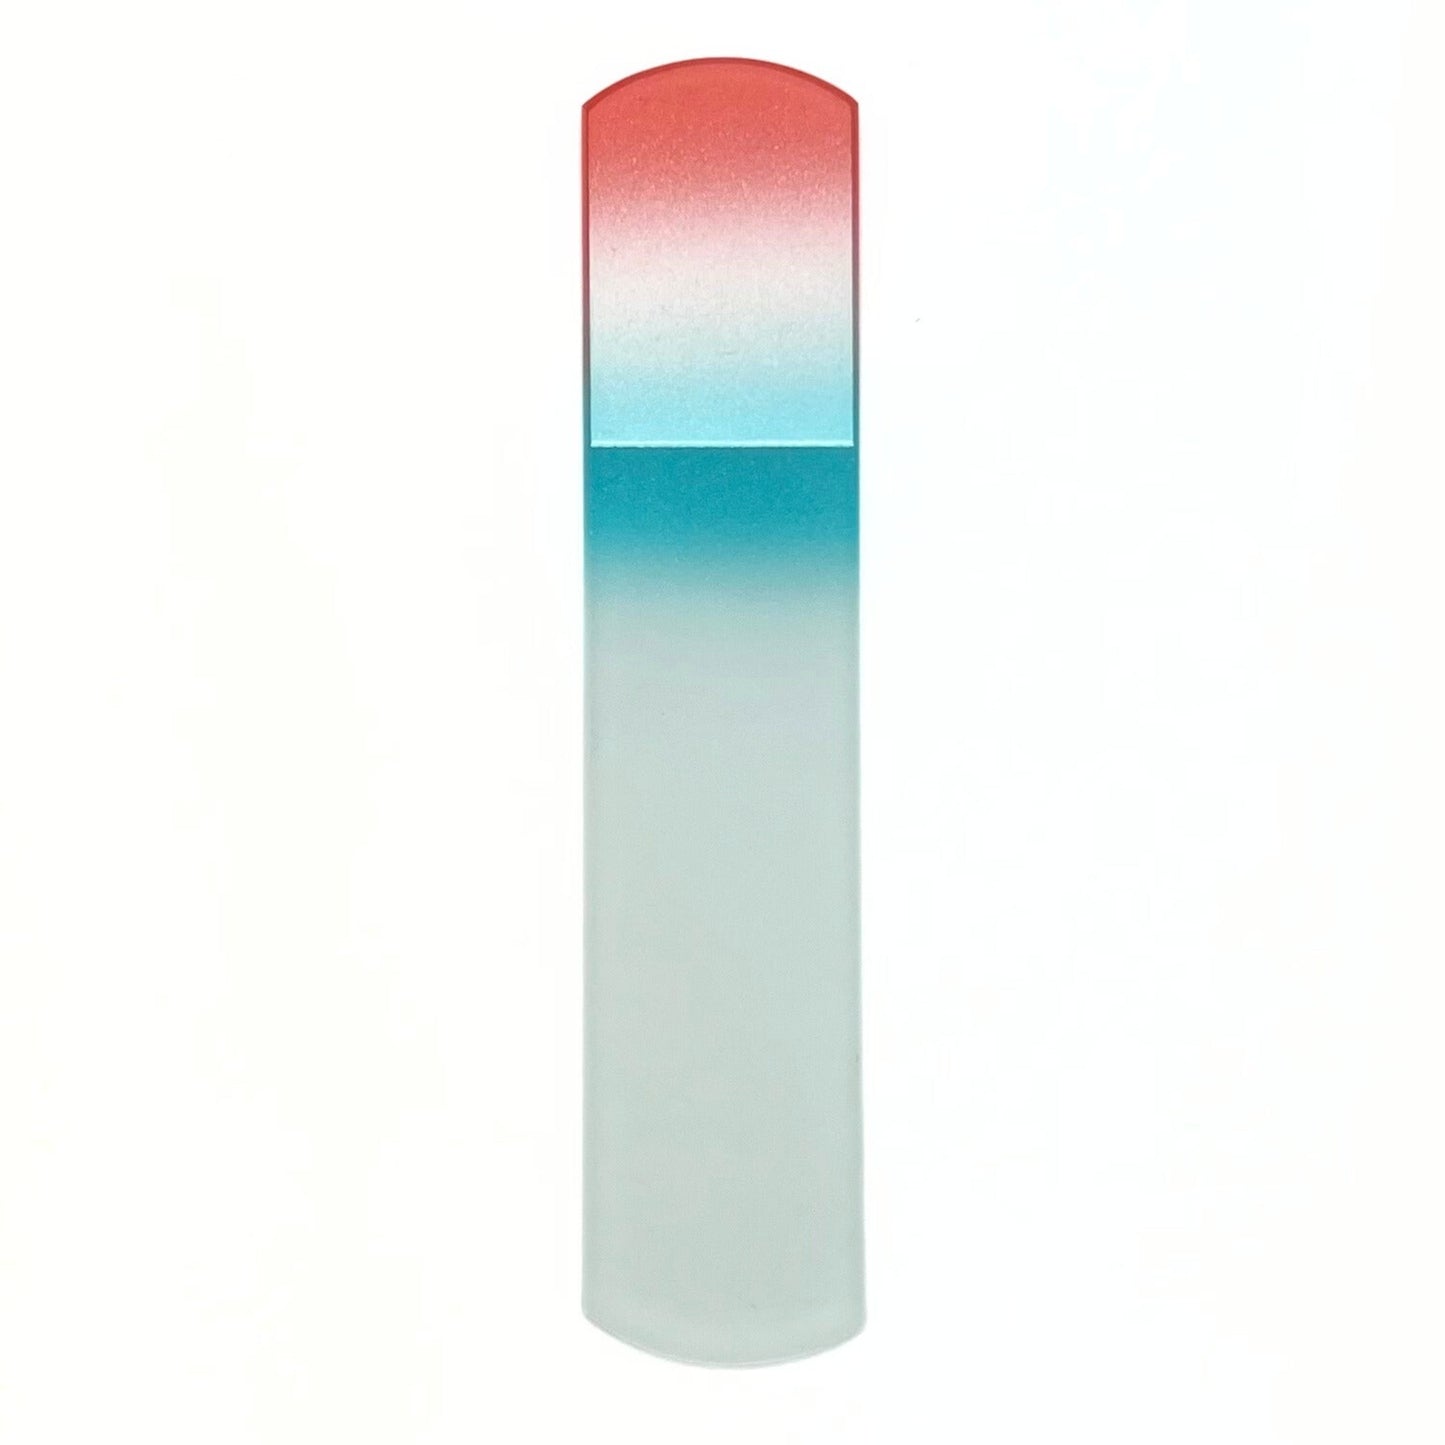 glass nail file for feet in coral and teal